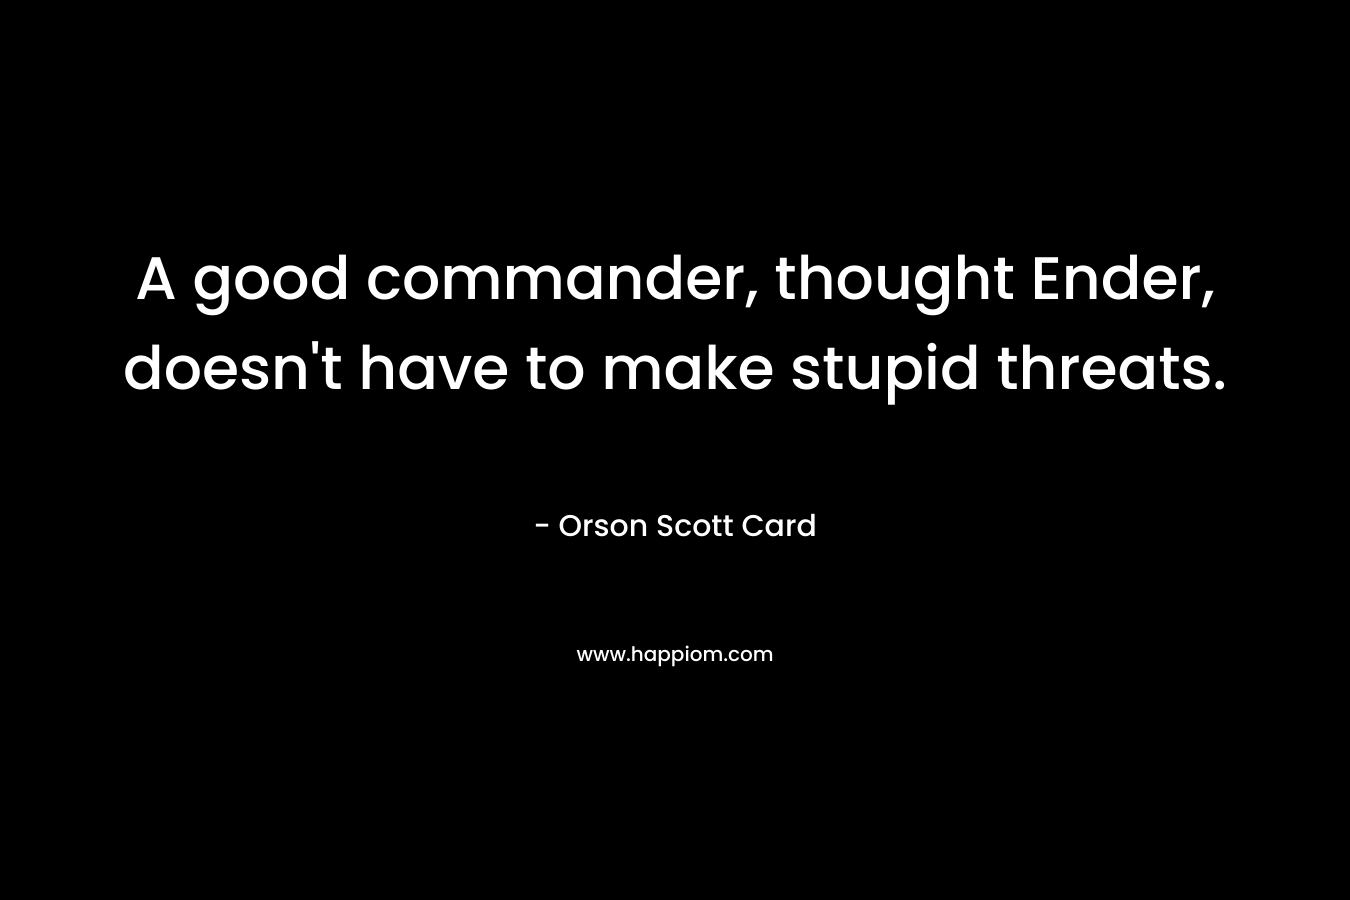 A good commander, thought Ender, doesn’t have to make stupid threats. – Orson Scott Card